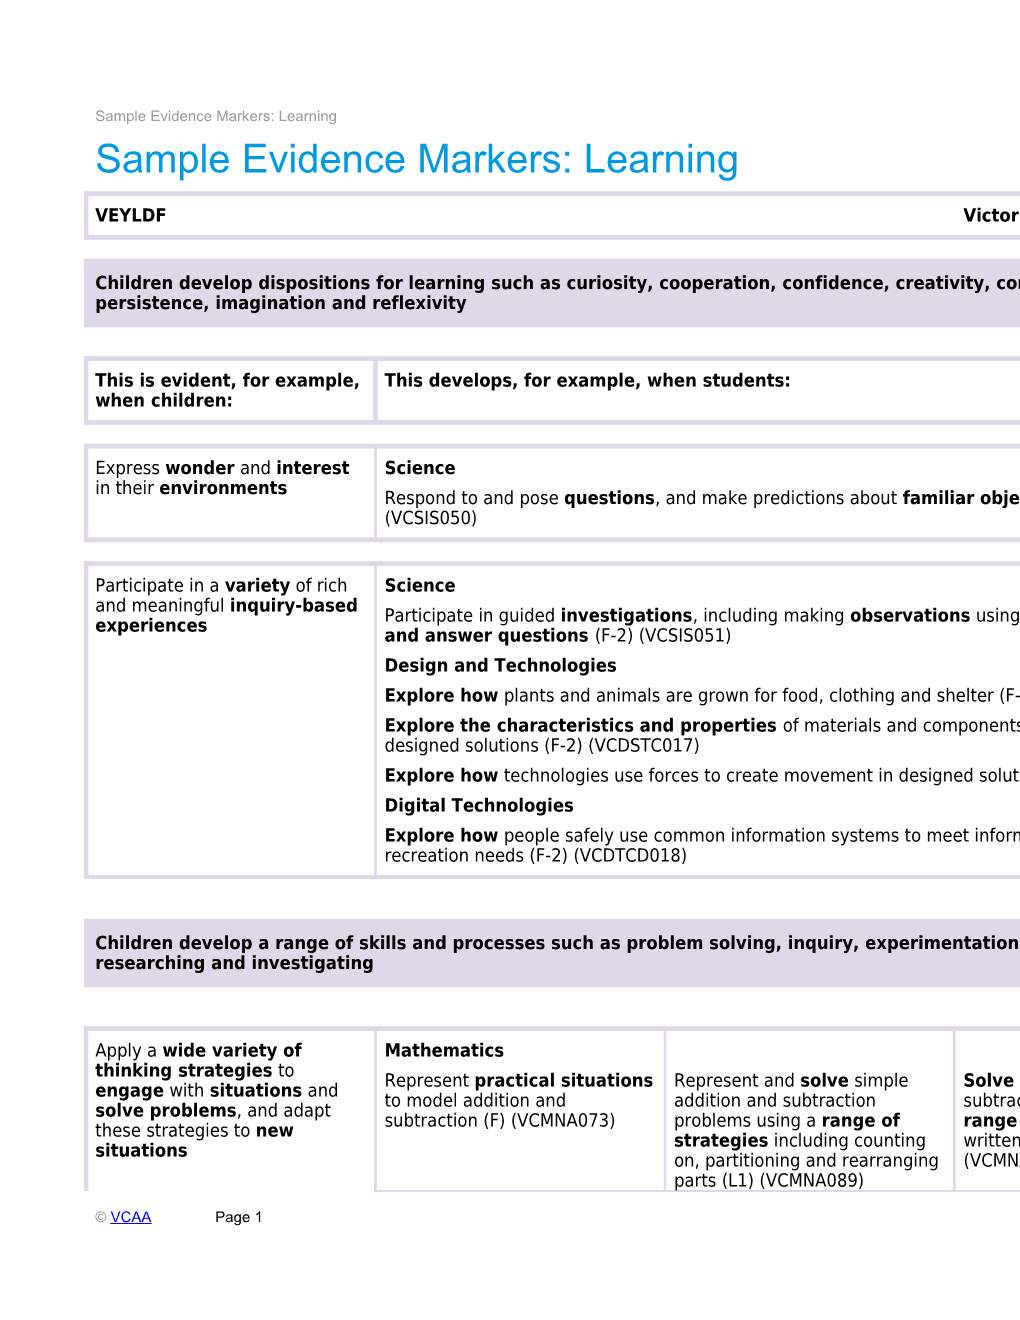 Sample Evidence Markers: Learning